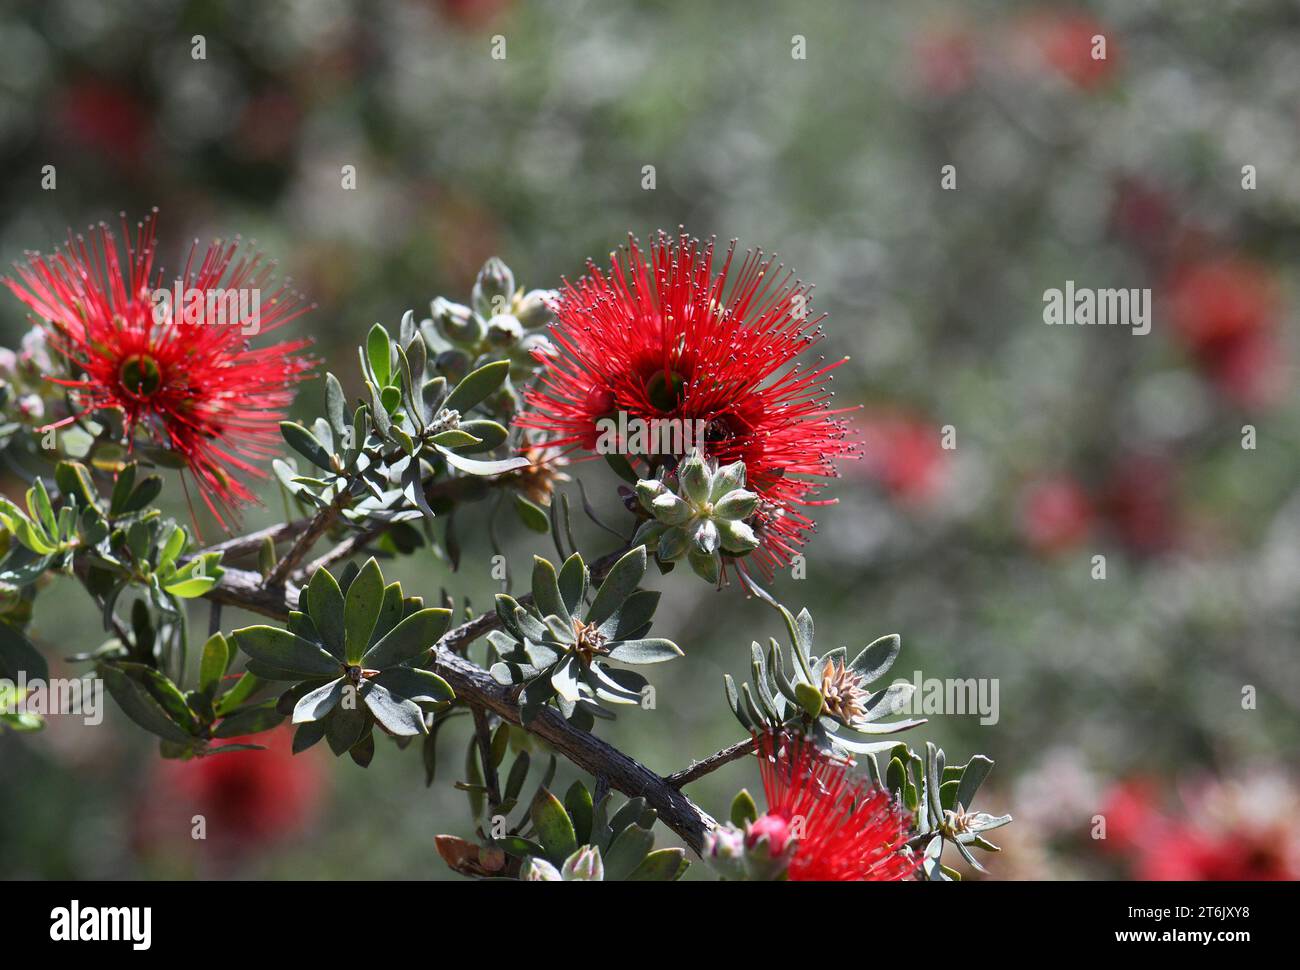 Close up of red flowers of the Australian native shrub Kunzea pulchella, family Myrtaceae. Hardy species endemic to sandy or clay soils, granite Stock Photo